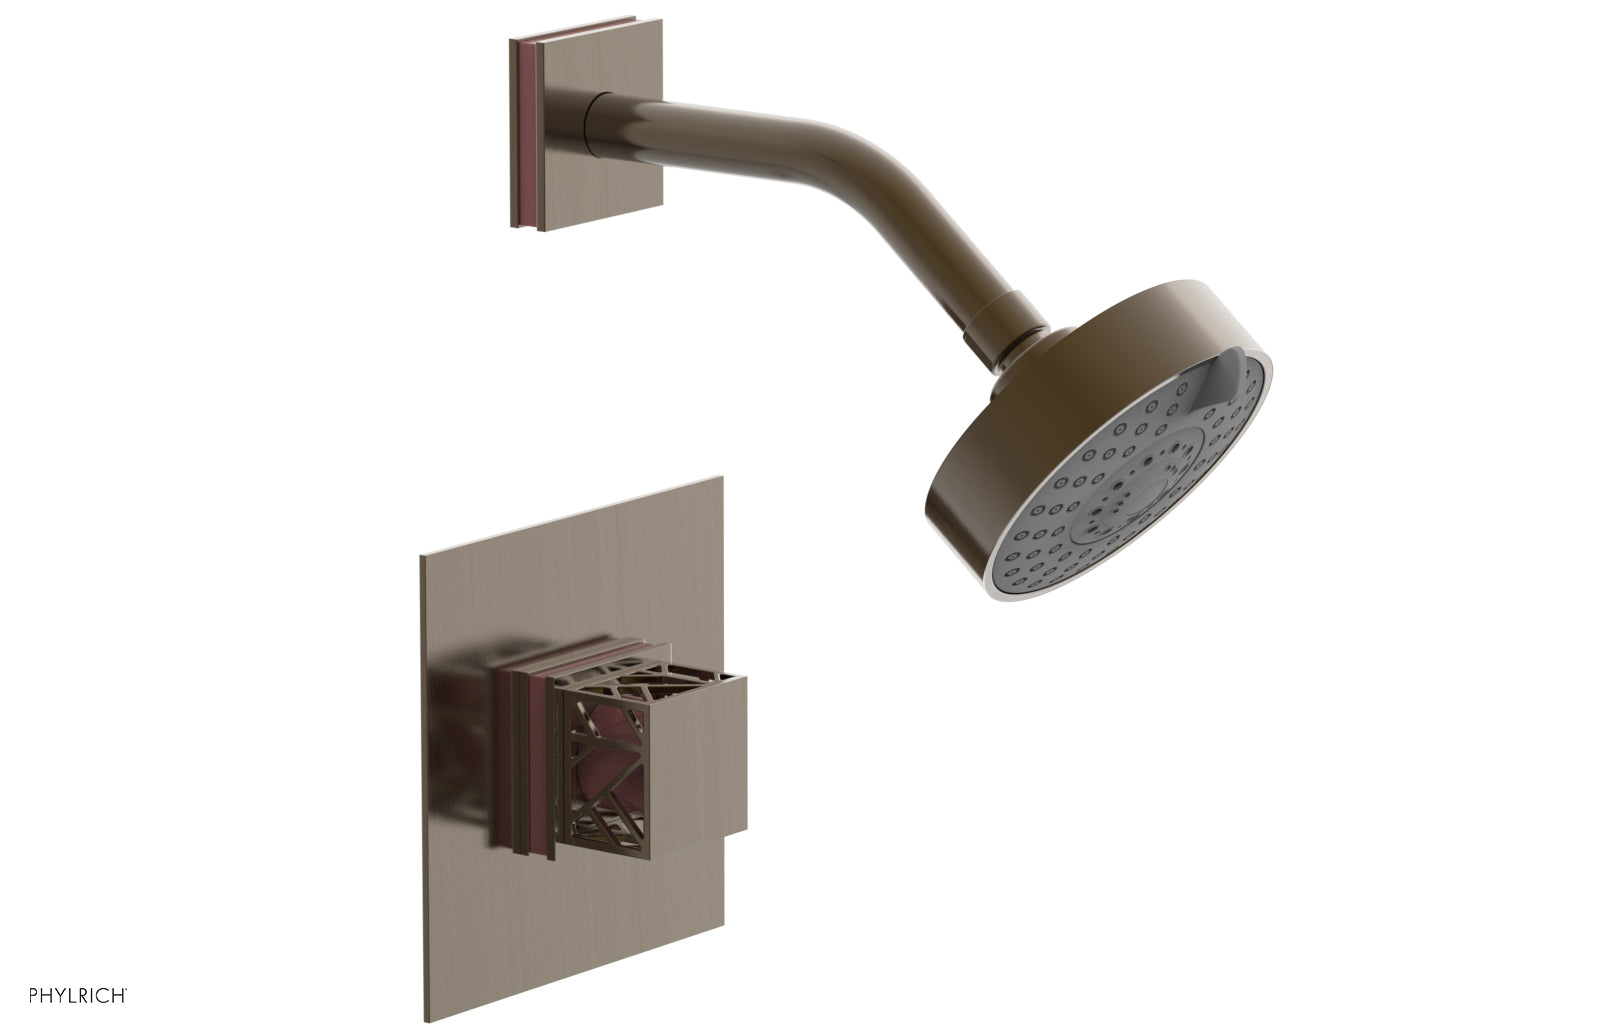 Phylrich JOLIE Pressure Balance Shower Set - Square Handle with "Pink" Accents